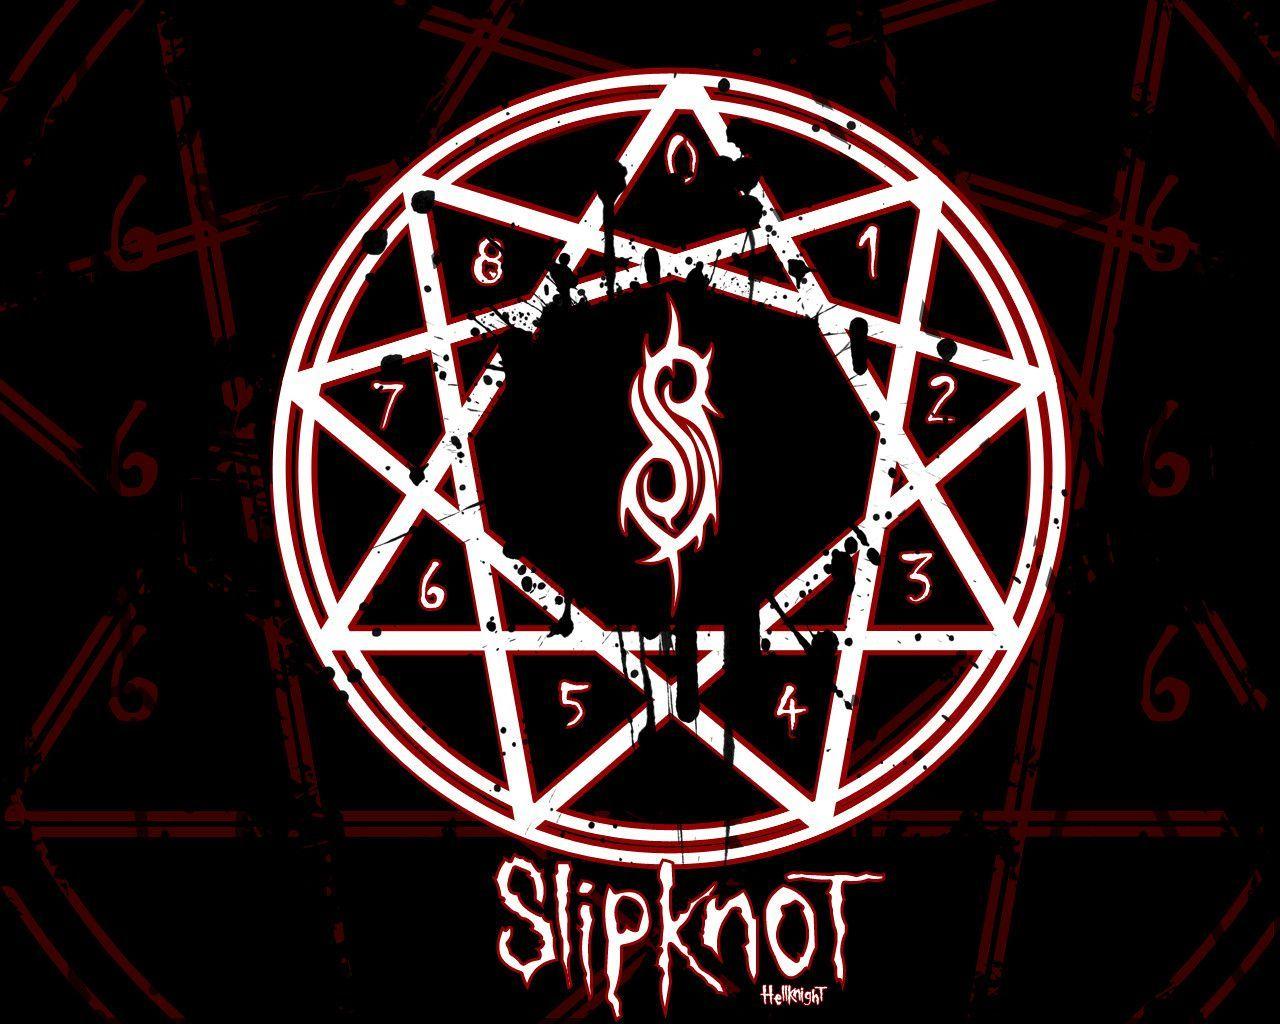 Metal Gods image Slipknot&logo HD wallpapers and backgrounds